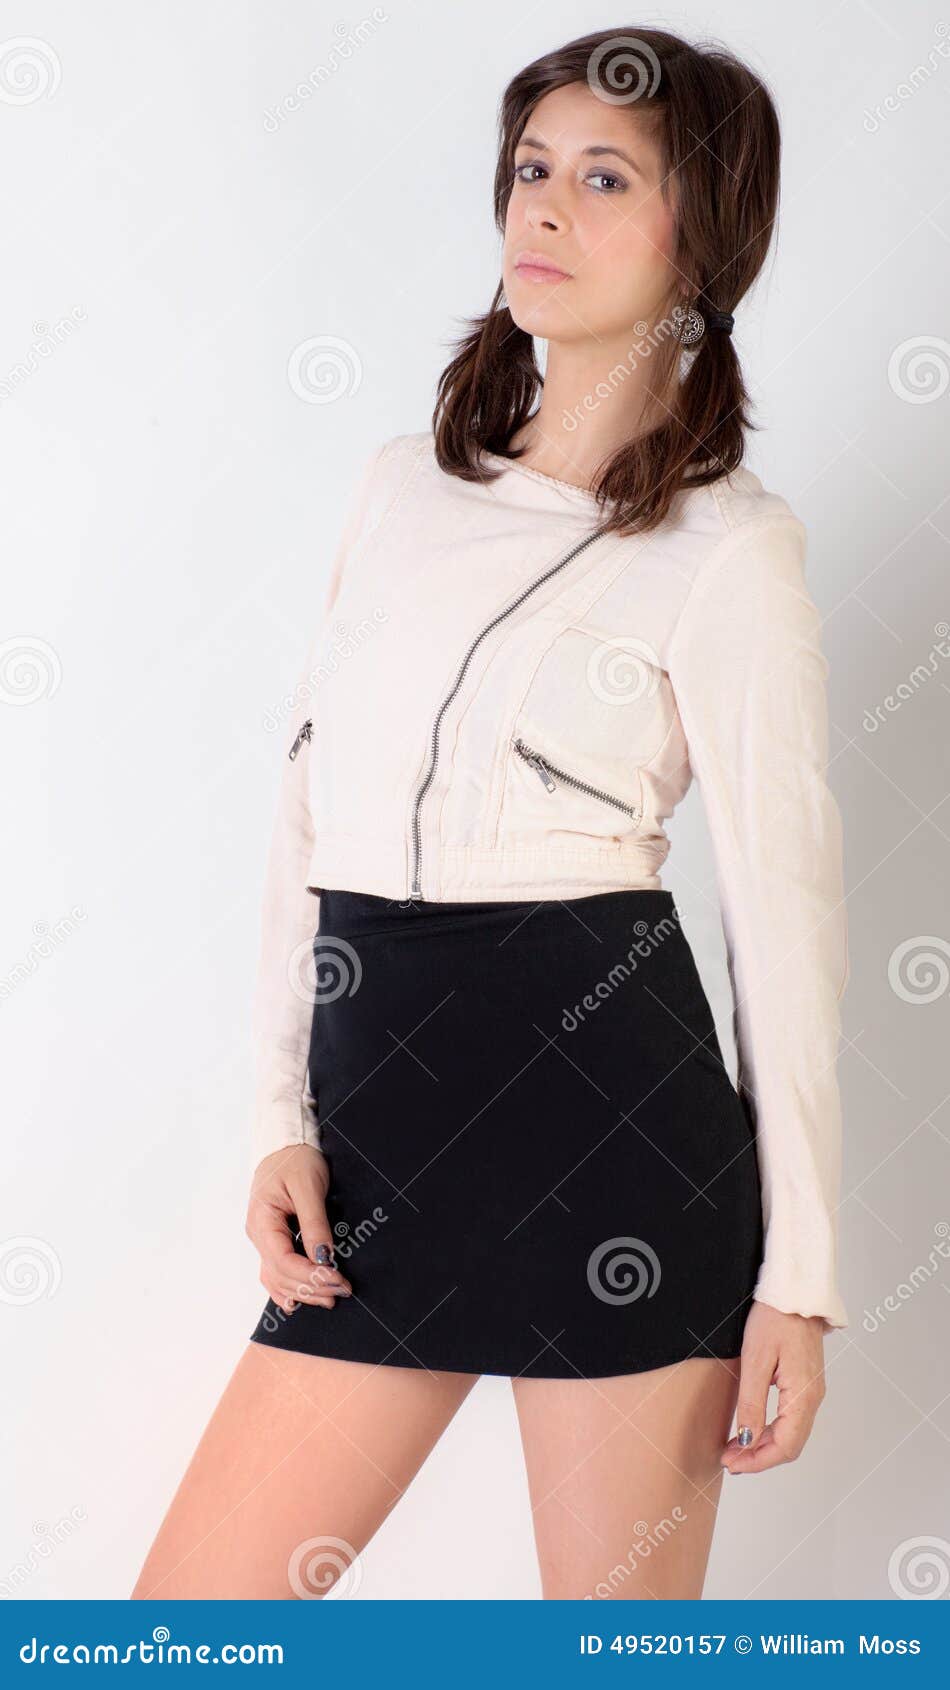 Young Woman in Jacket and Skirt Stock Image - Image of cute, model ...